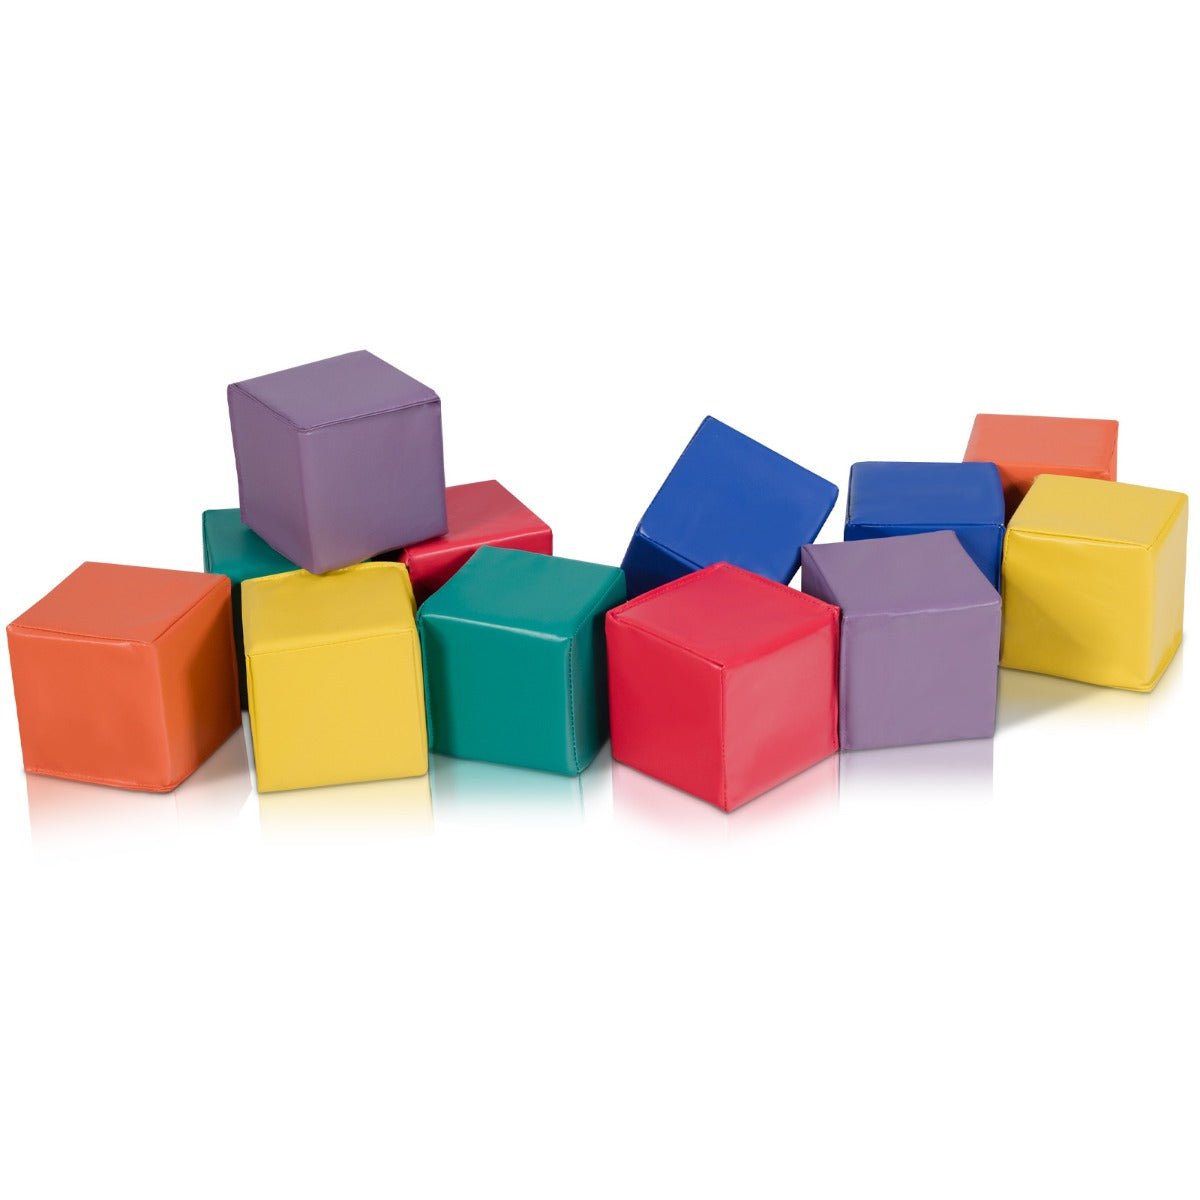 Colourful 12-Piece Stacking Foam Cubes Set: The Ultimate Playtime Adventure!